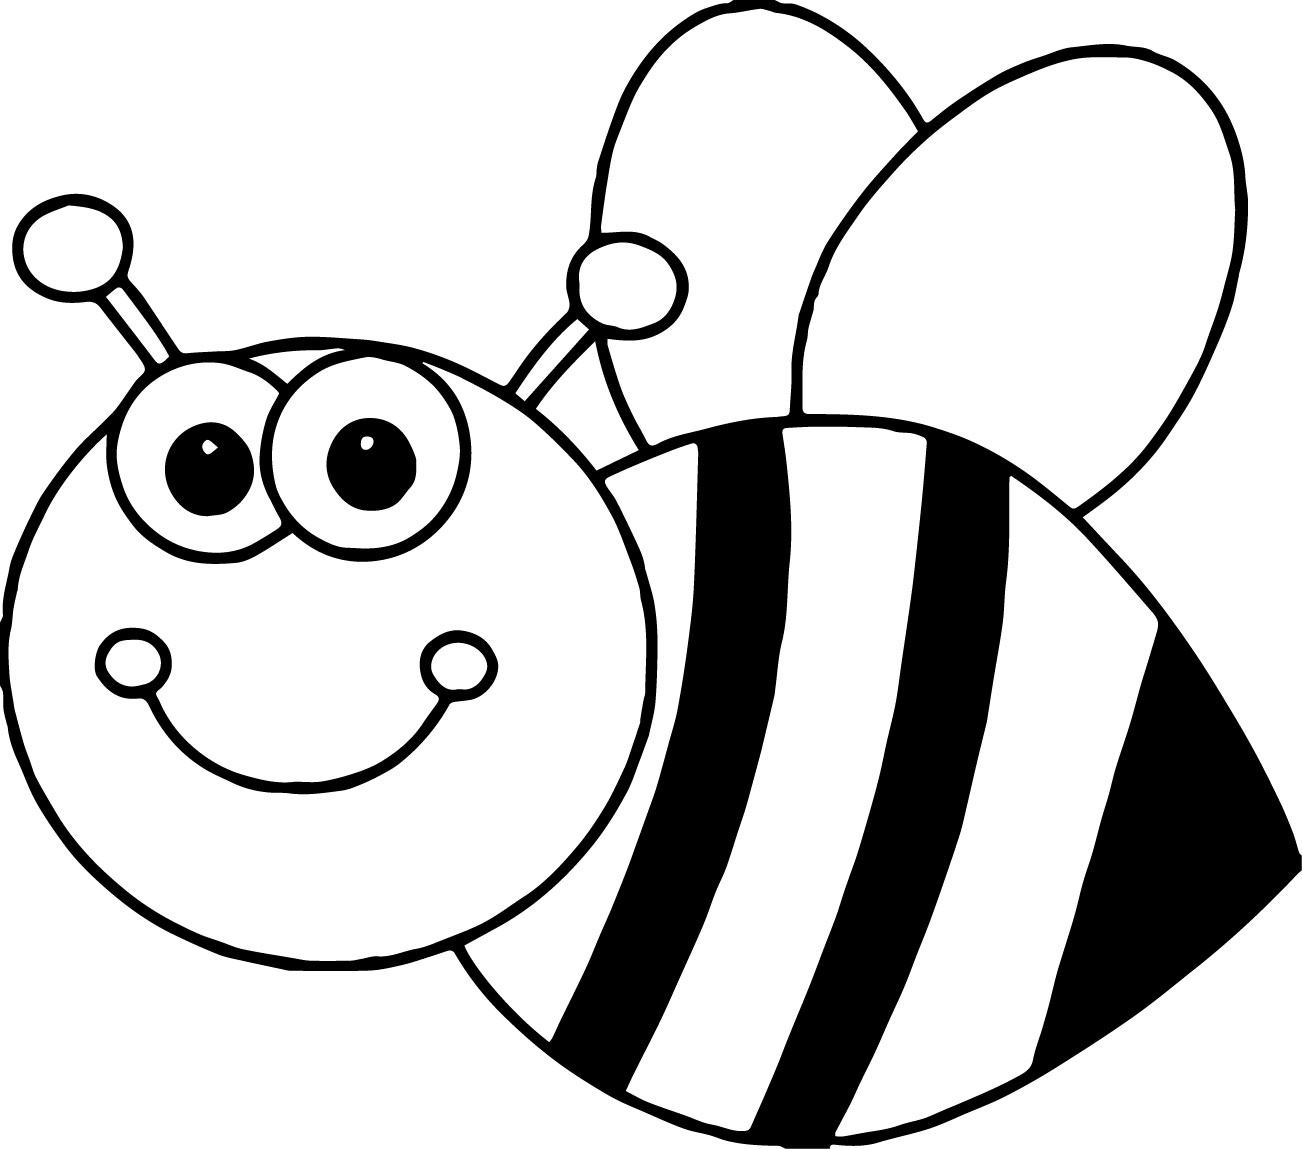 Blank And White Coloring Image Of Bumble Bee Simple Image ClipArt Best